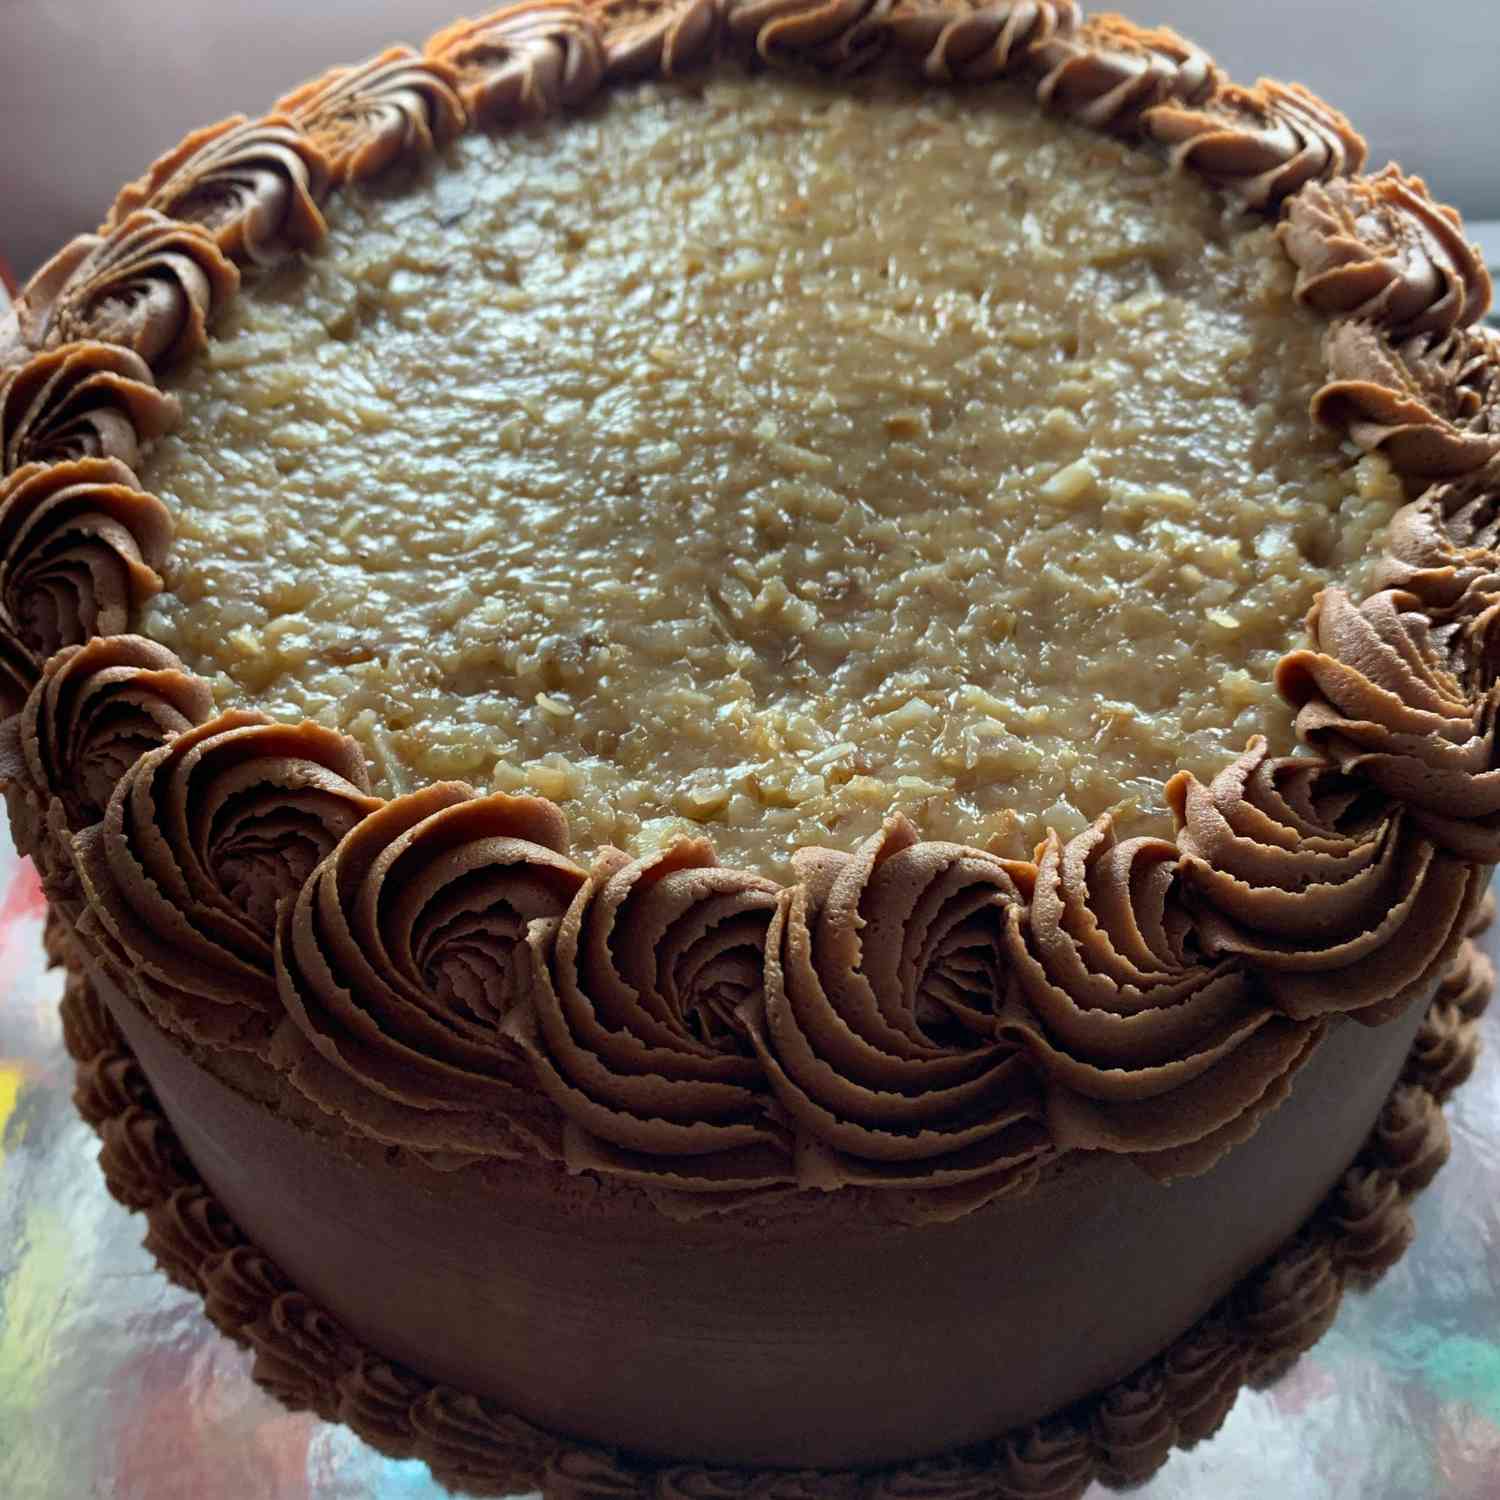 Top-down view of a cake with coconut-pecan frosting on top, with chocolate frosting on the sides and piped chocolate rosettes around the top and bottom edges